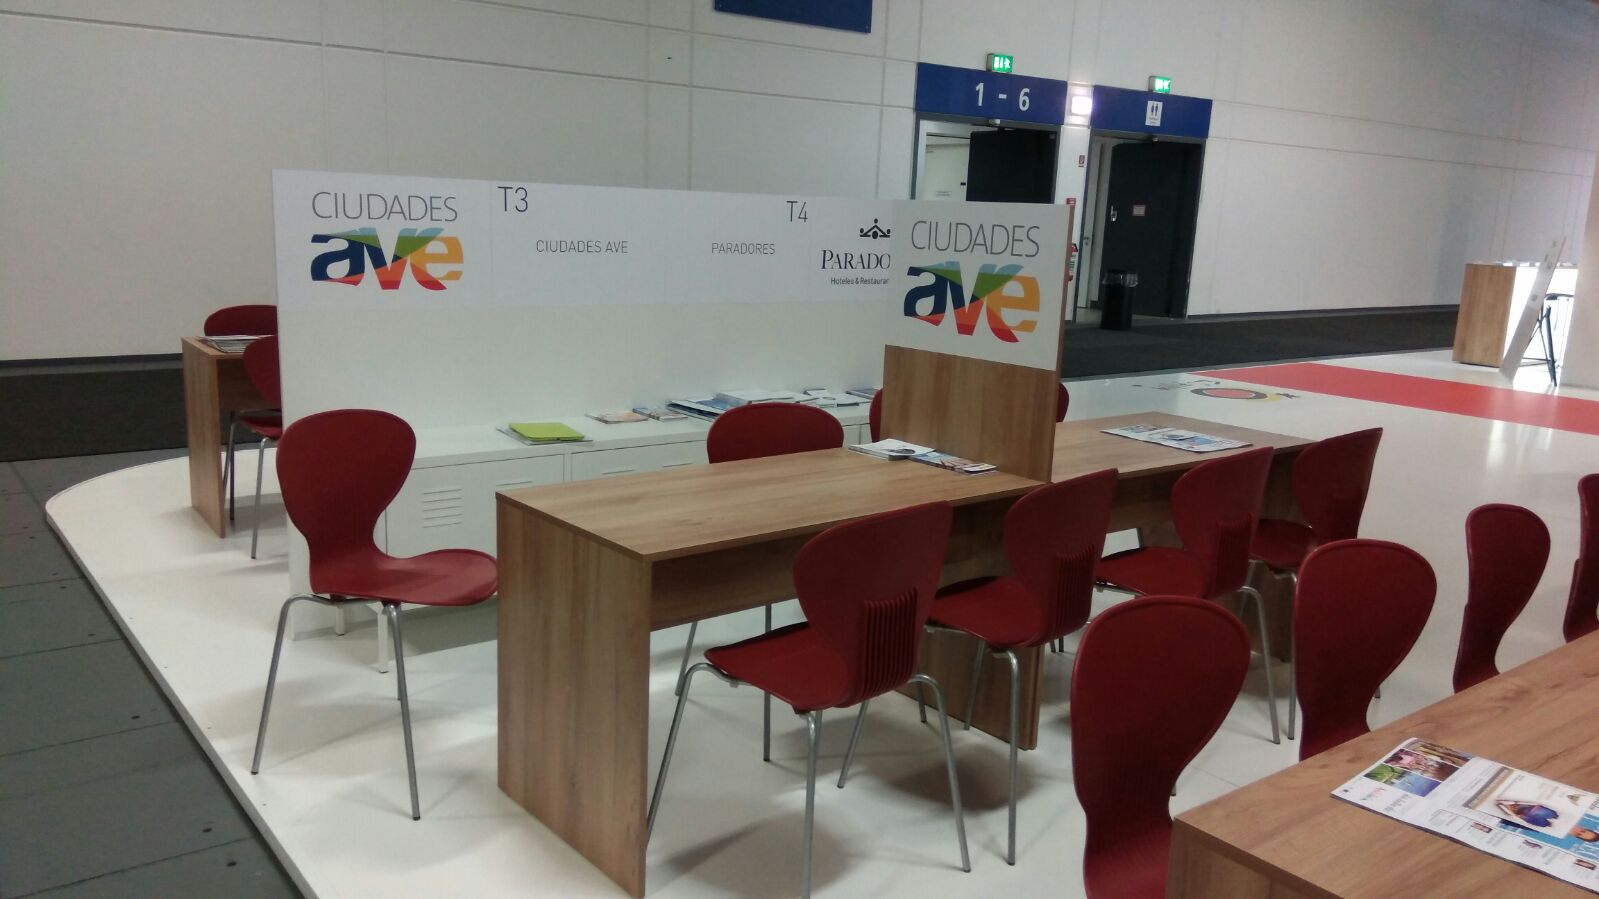 AVE Cities Network participates in the ITB in Berlin to consolidate its destinations and products in German market